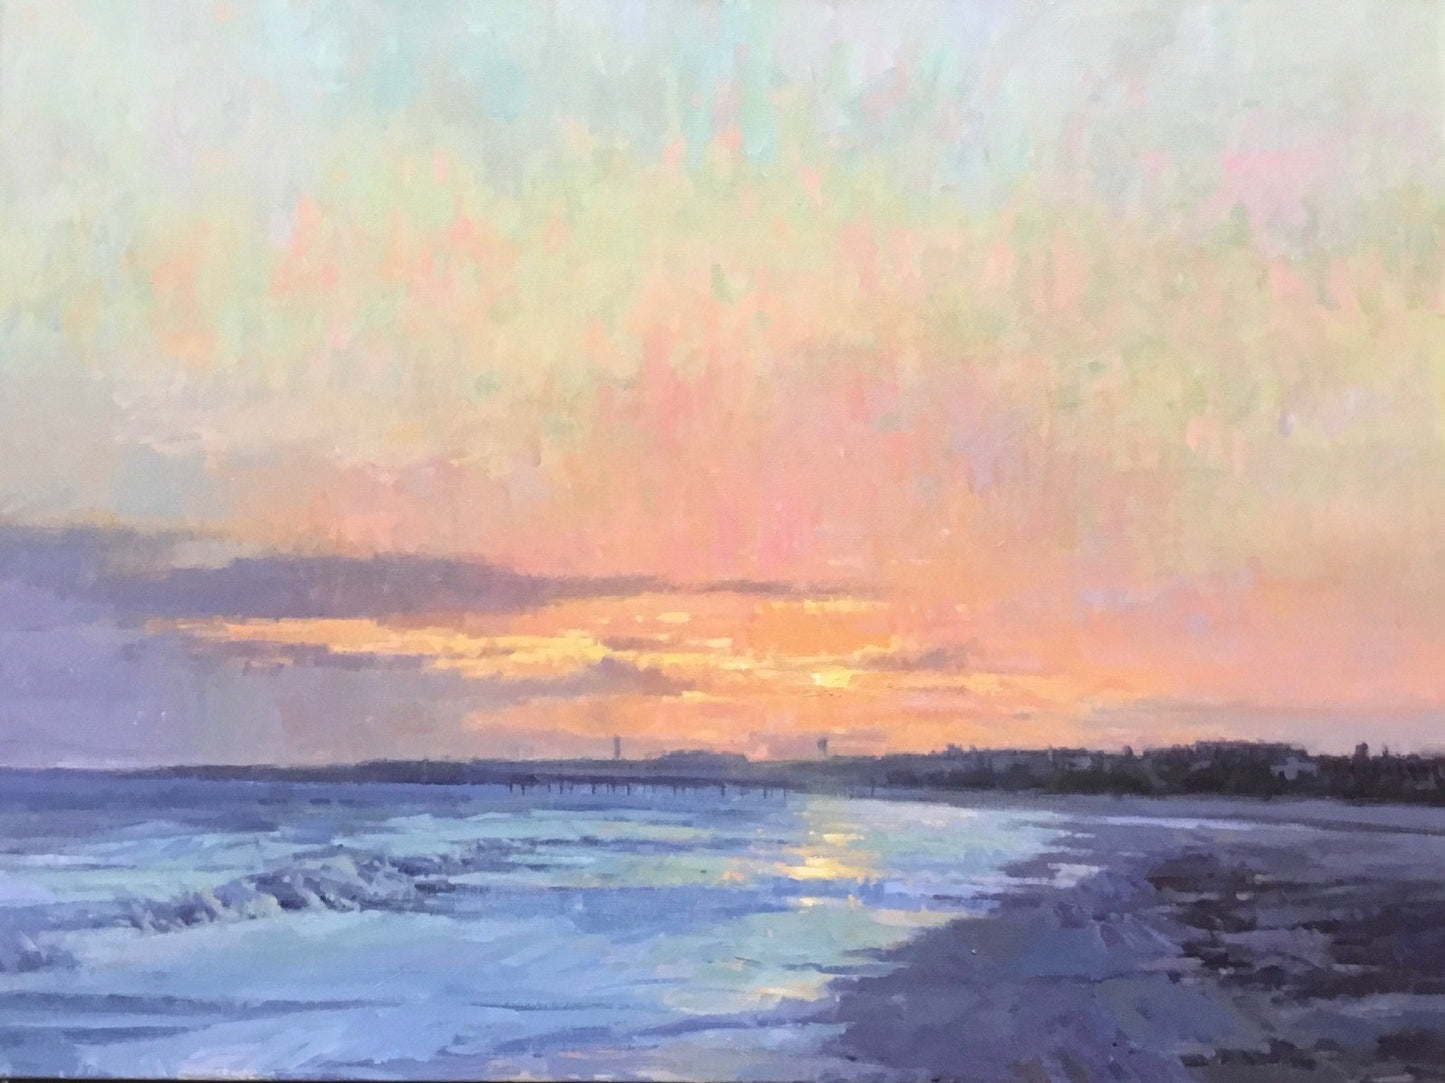 Impressionists Sunset by John Poon at LePrince Galleries